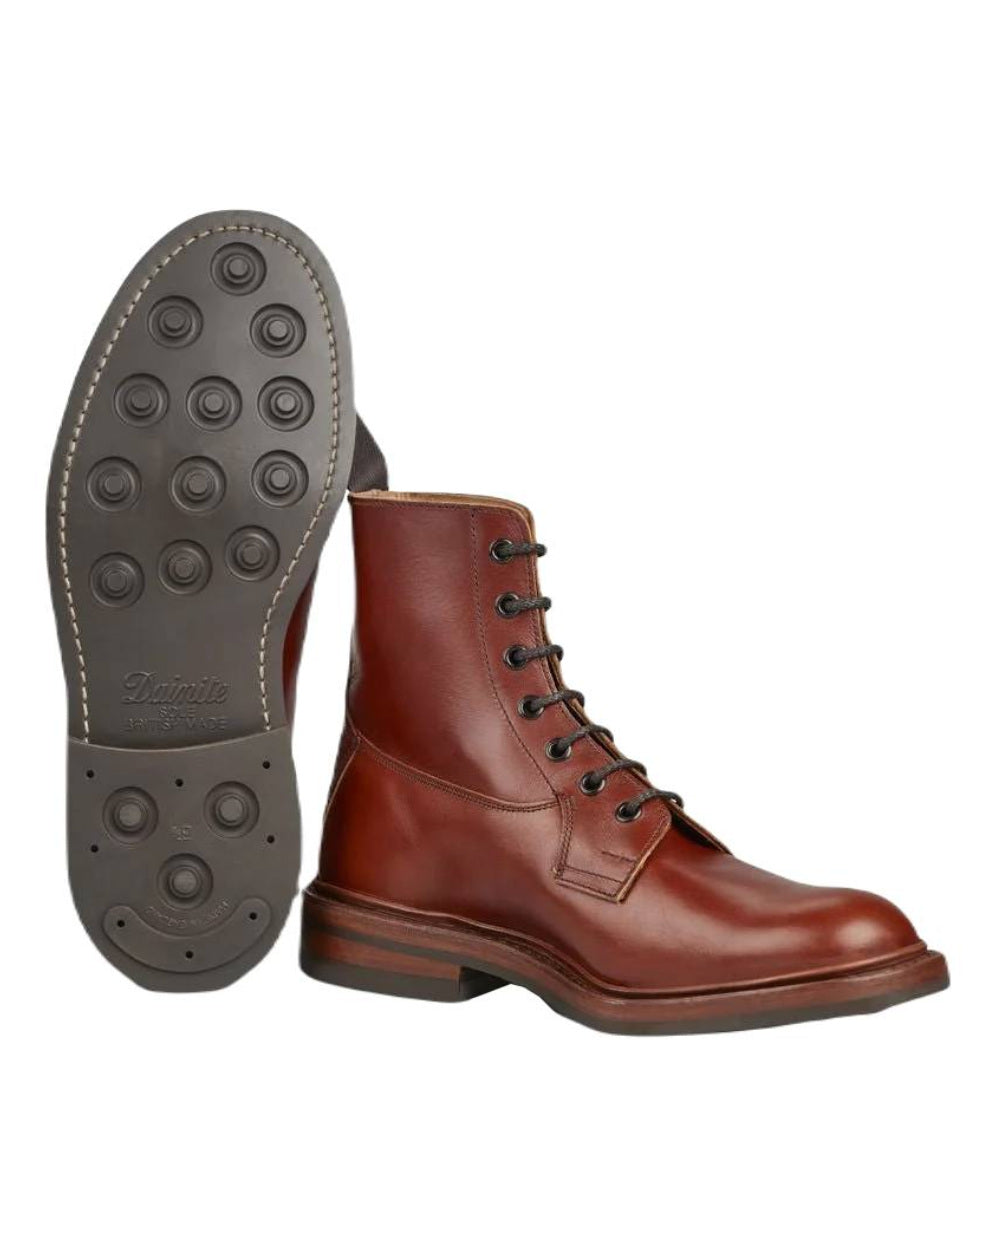 Marron Antique Coloured Trickers Burford Country Boot Dainite Sole On A White Background 